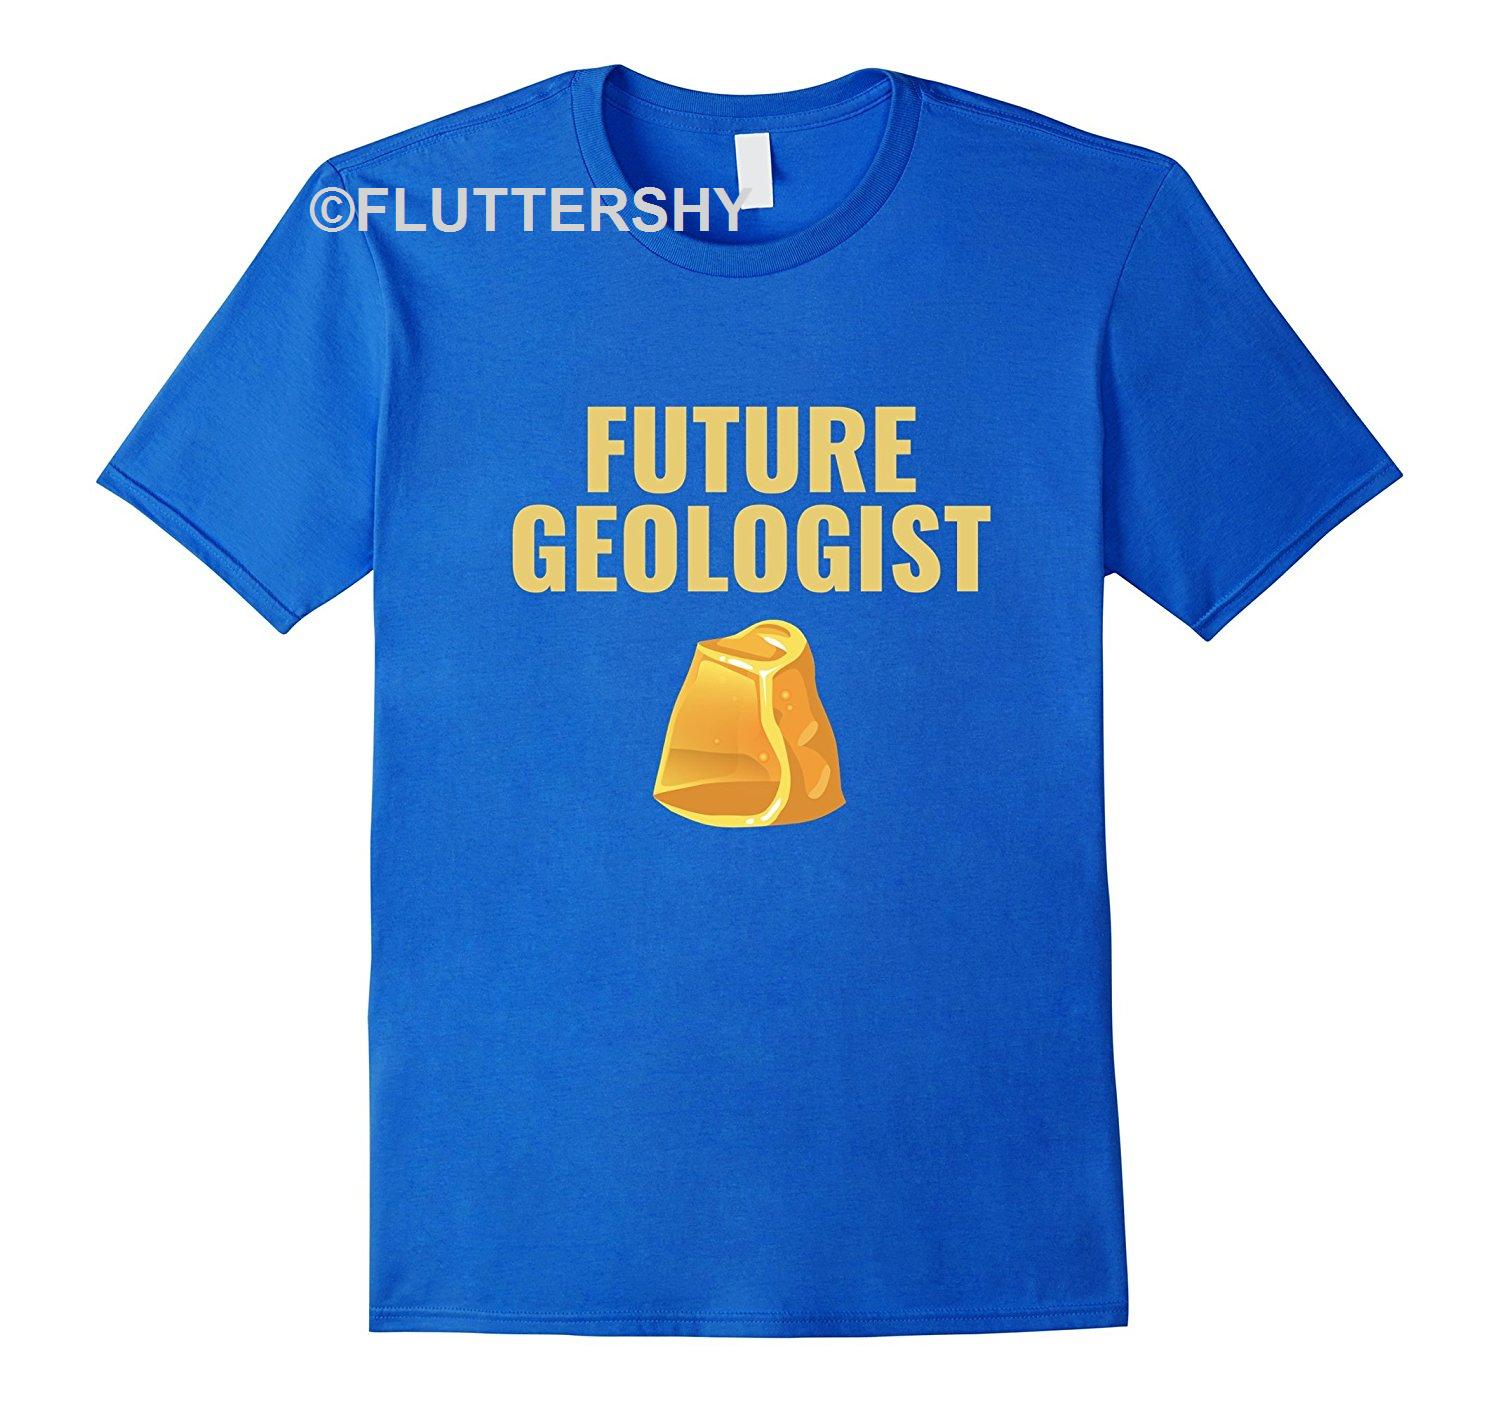 Outstanding Order Future Geologist T-shirt Funny Geology Graduation Gift